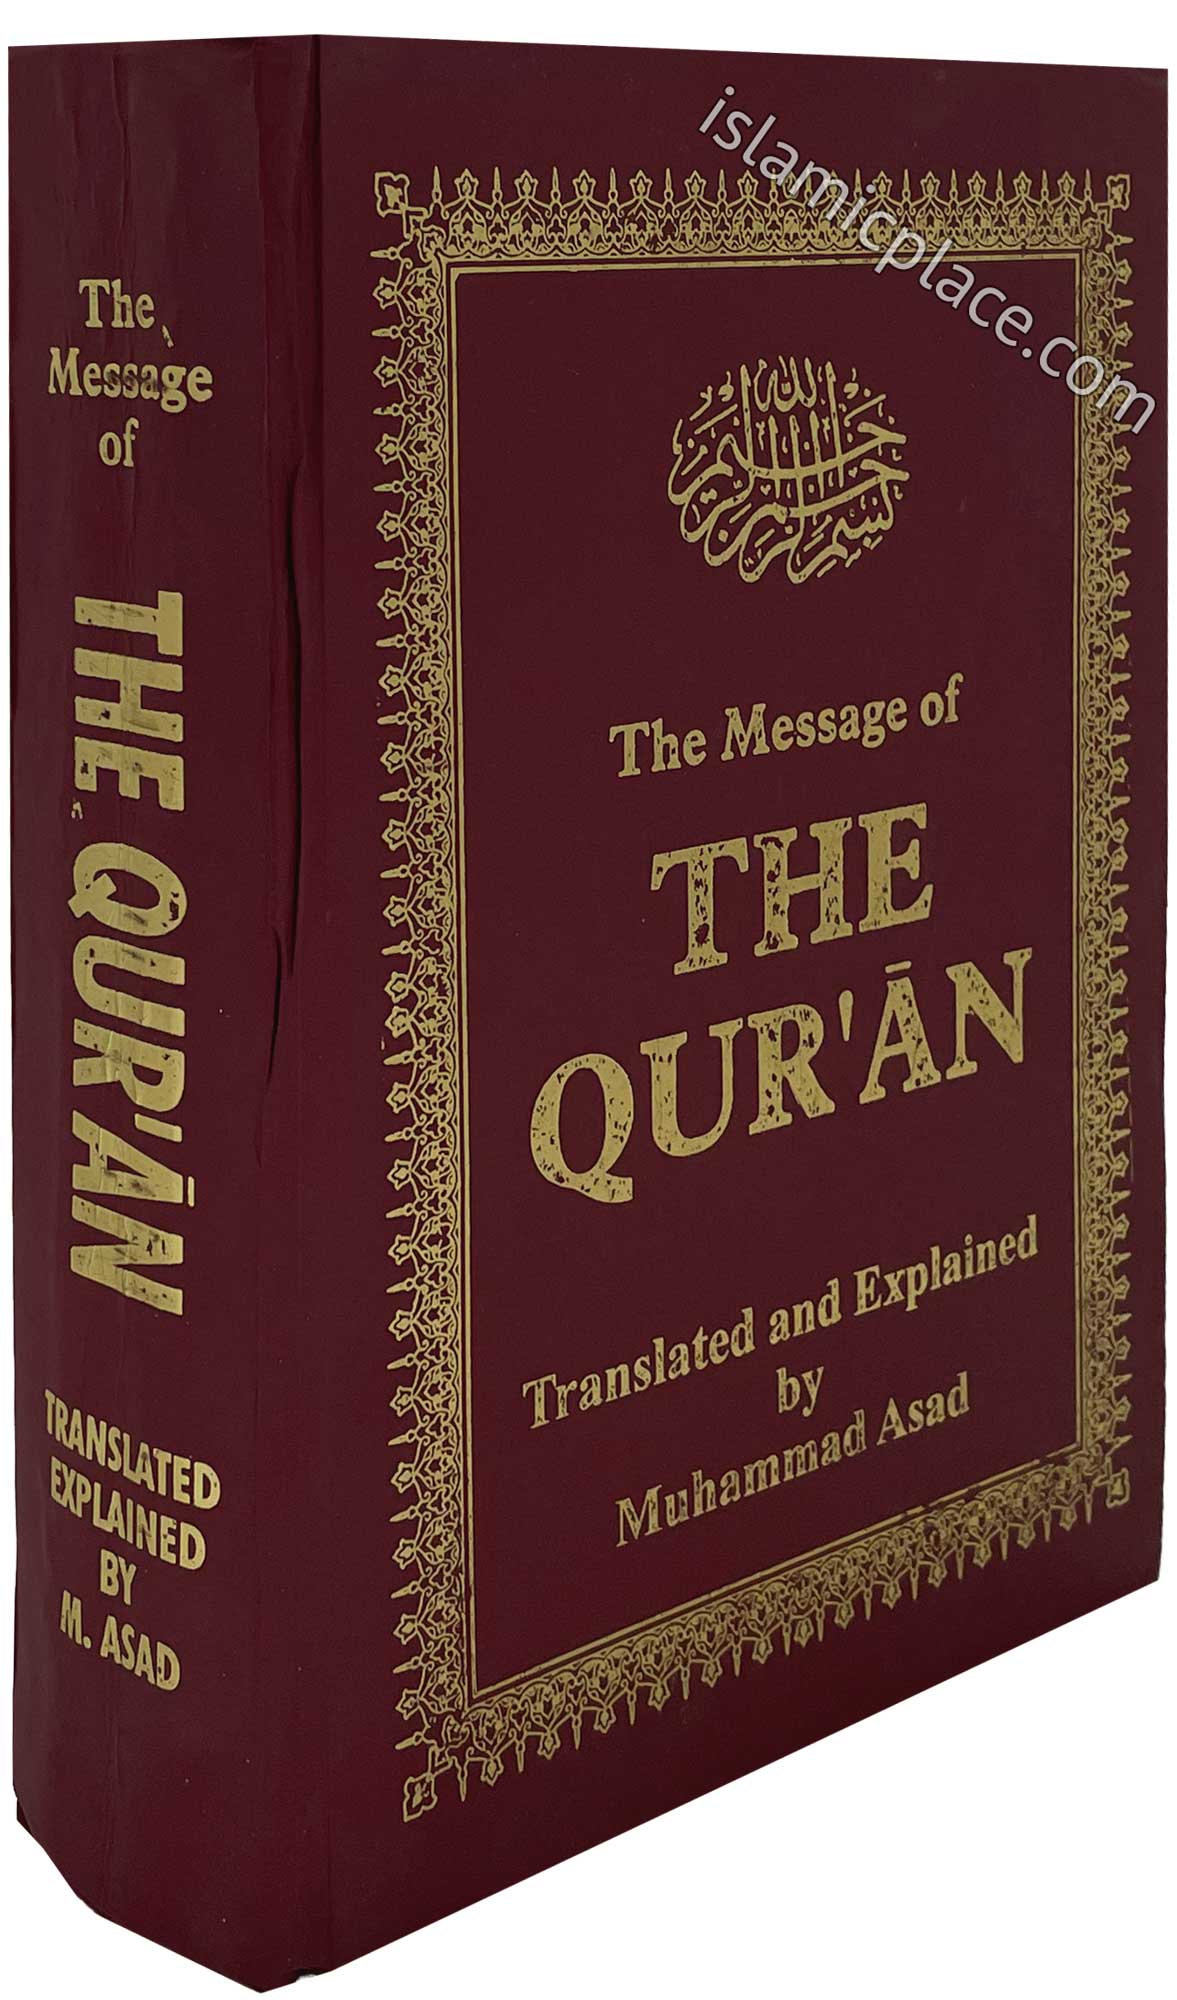 The Message of The Qur'an - The Islamic Place